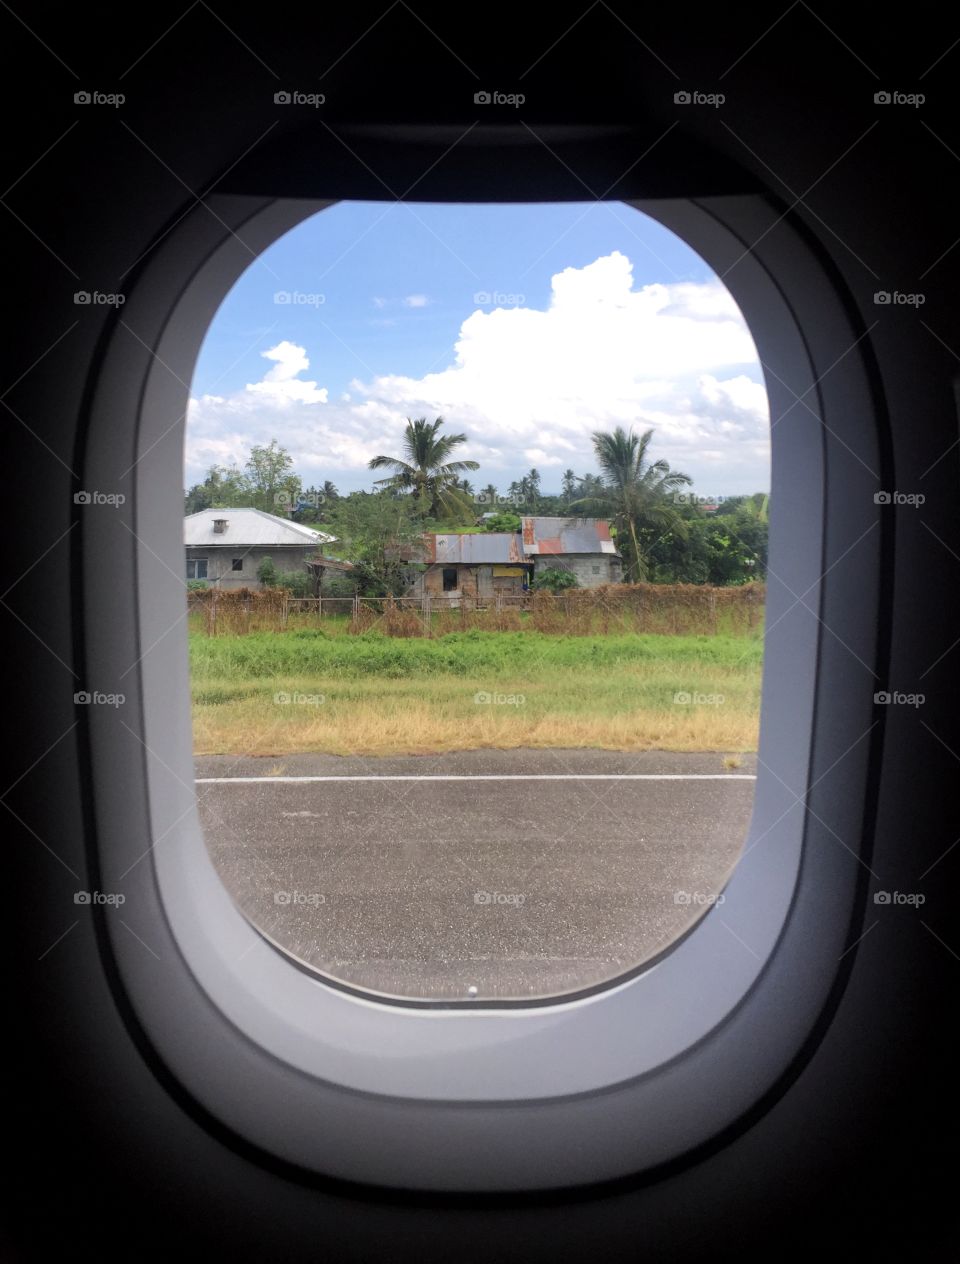 Looking out the plane window in Boracay